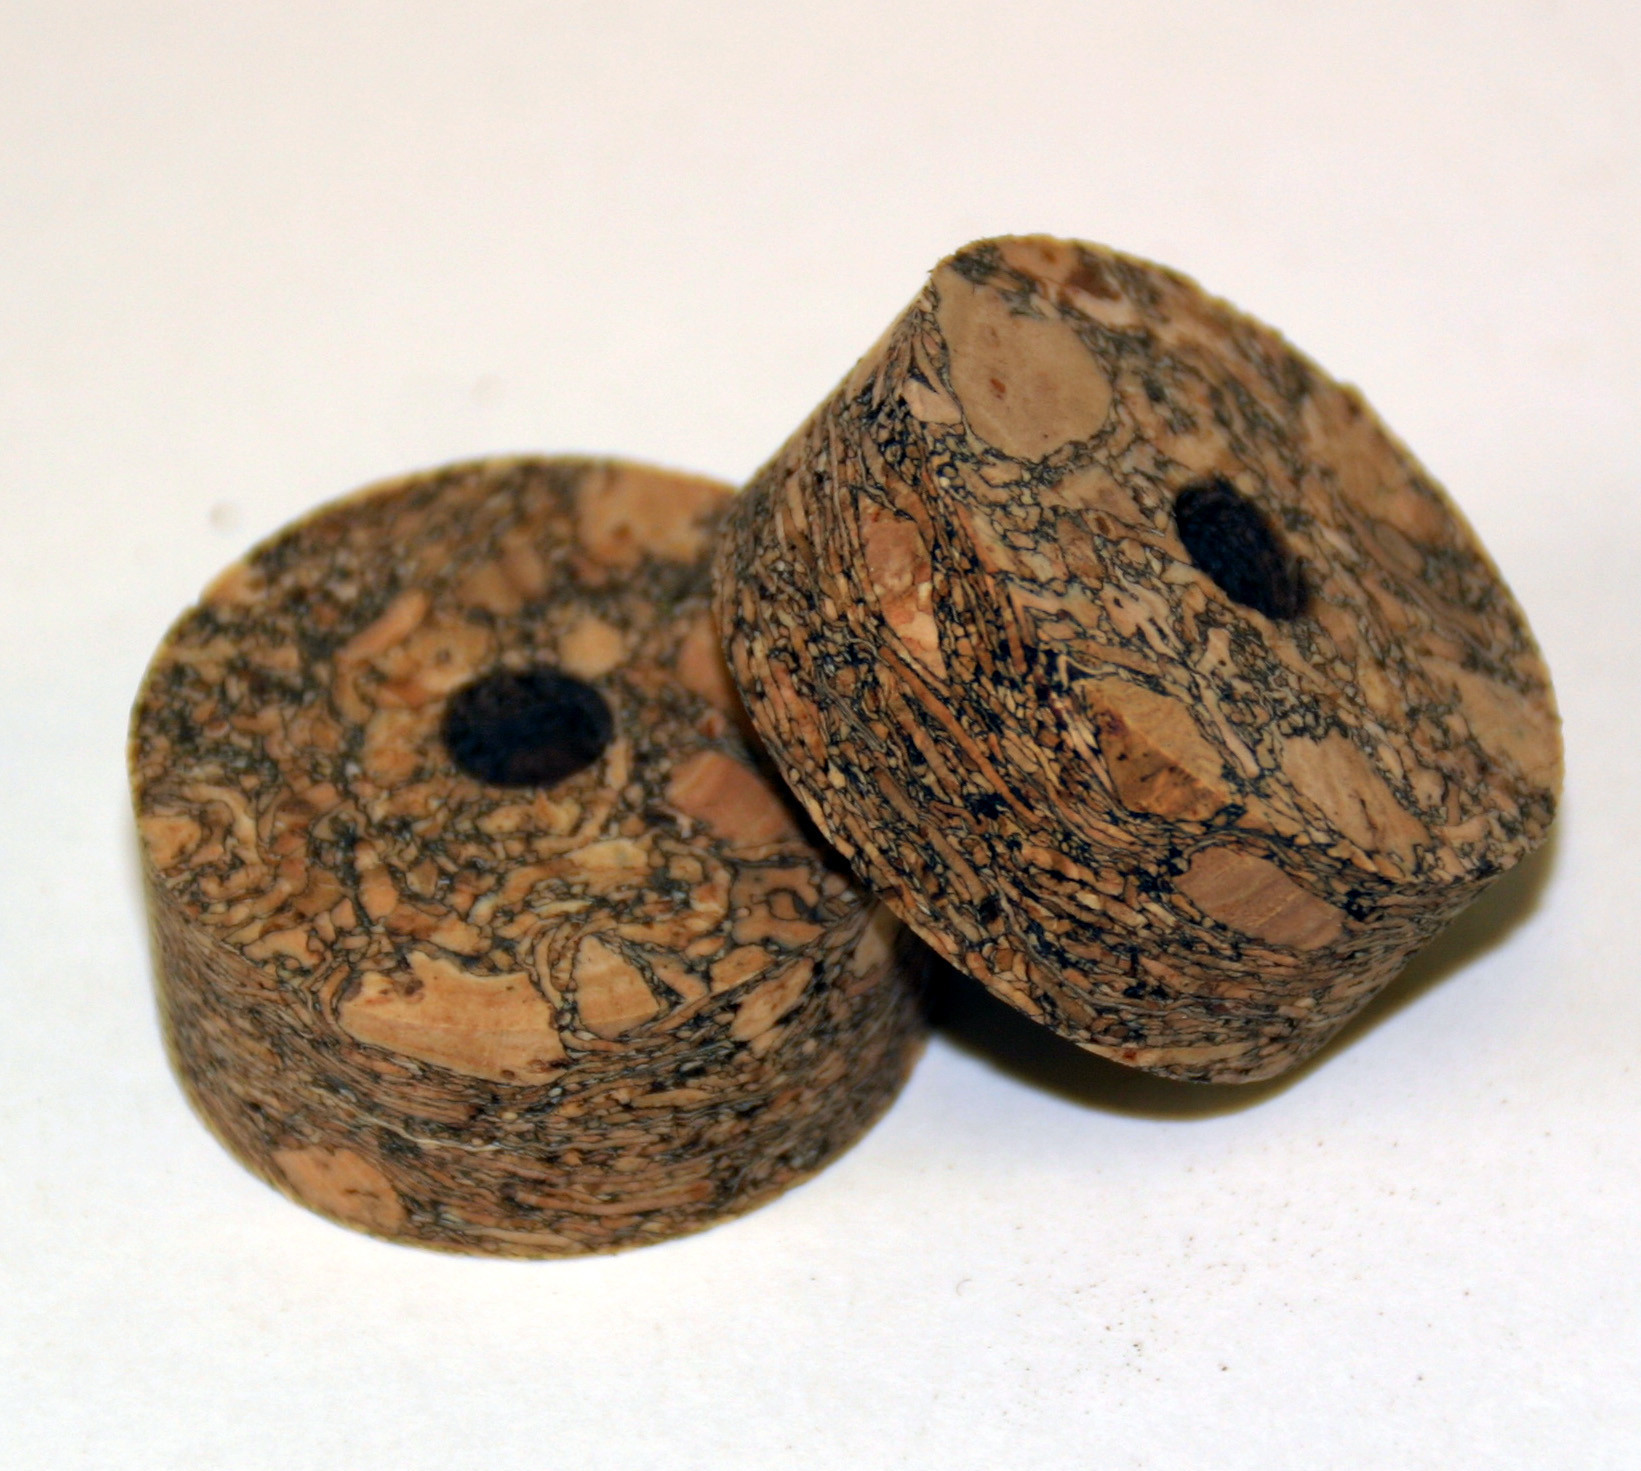 Cactus, Coloured & Burl Cork Rings - Corks, Cork Products